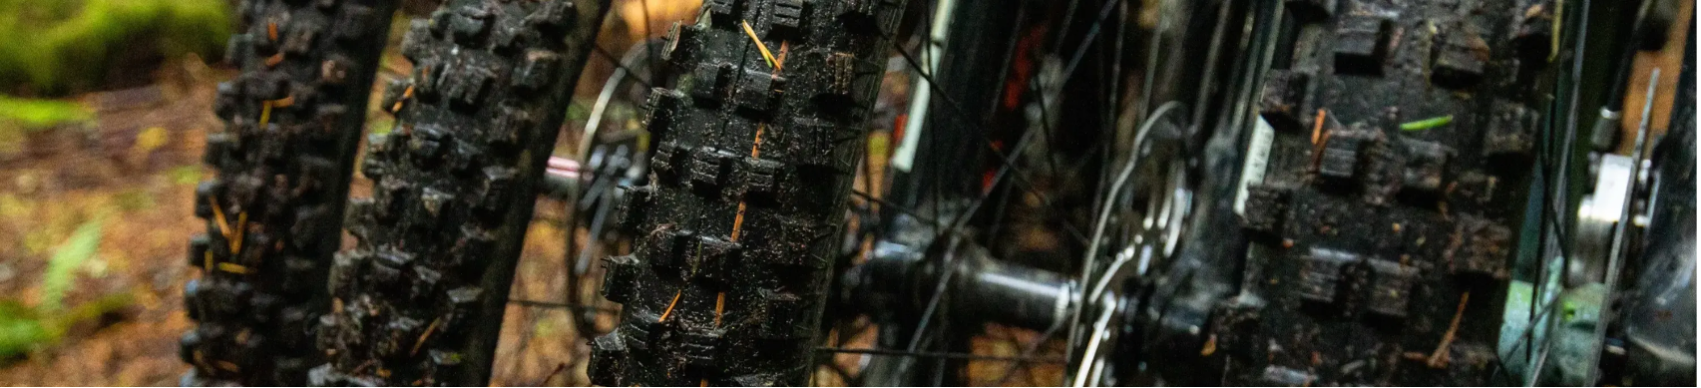 Maxxis and Schwalbe MTB Tires Shorty Magic Mary Assegai front tires